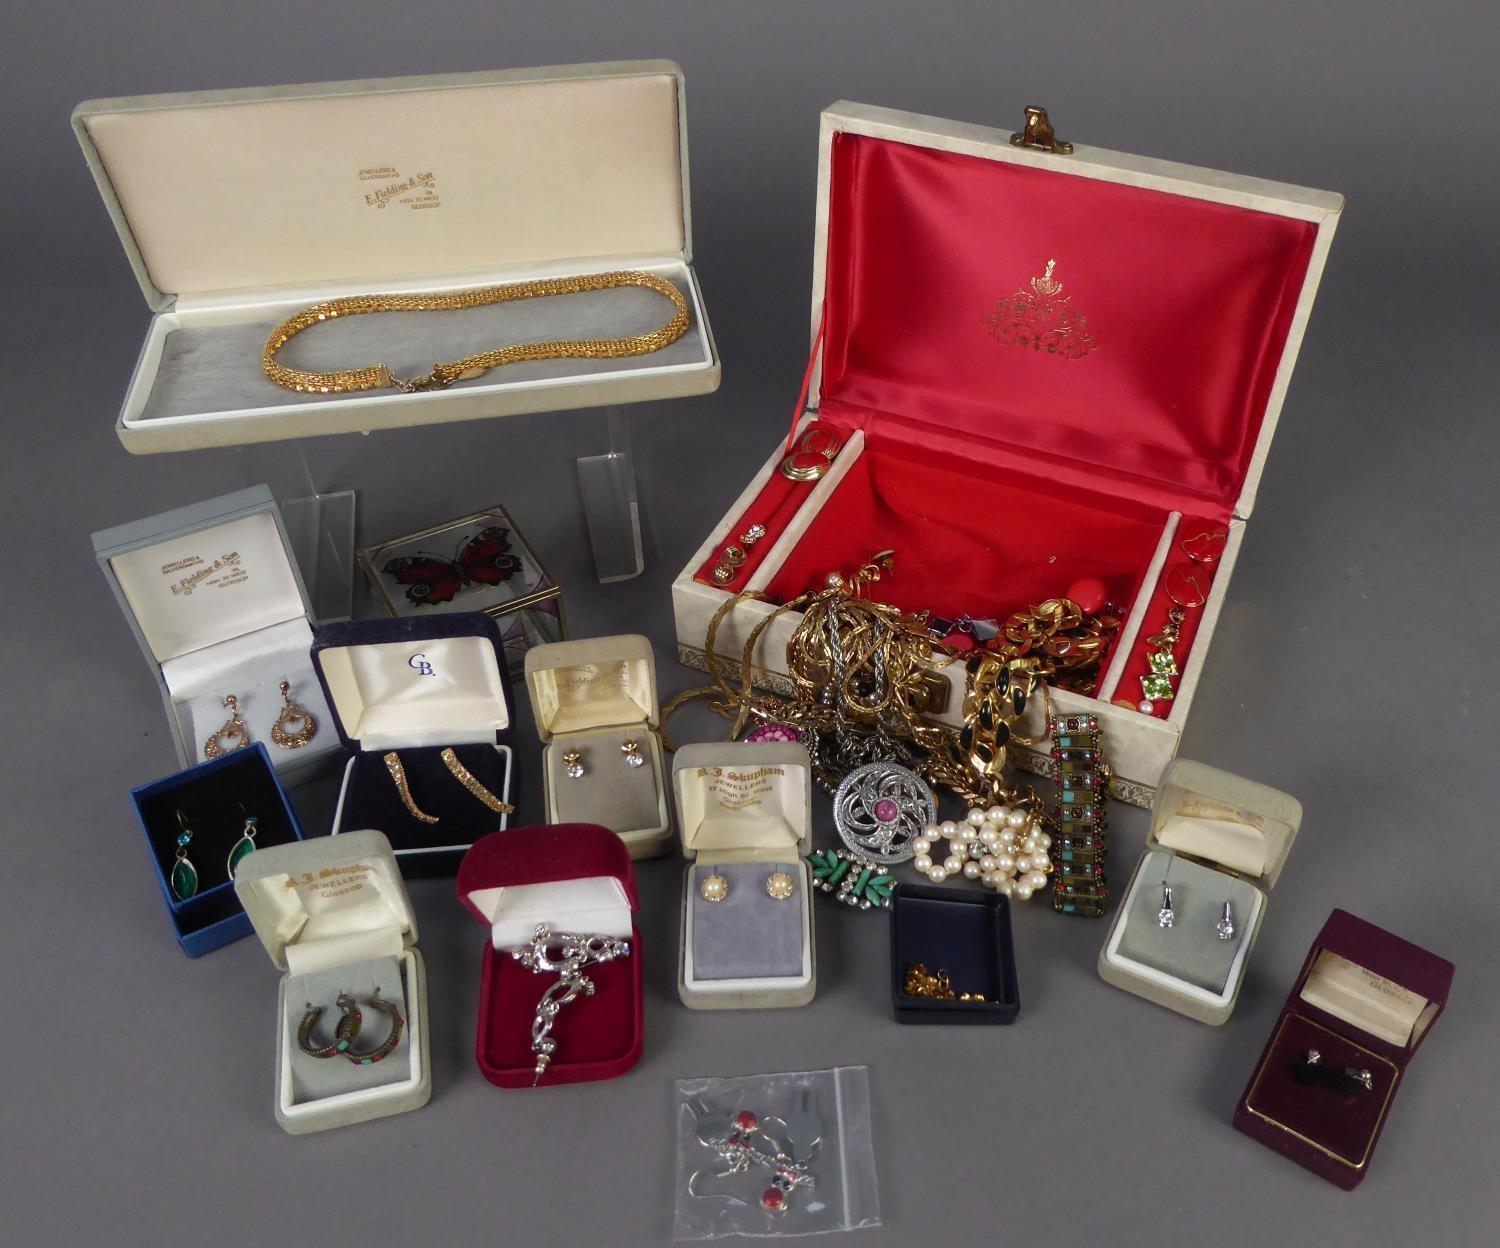 COSTUME JEWELLERY including earrings, many individually boxed, the CONTENTS OF A JEWELLERY CASE plus